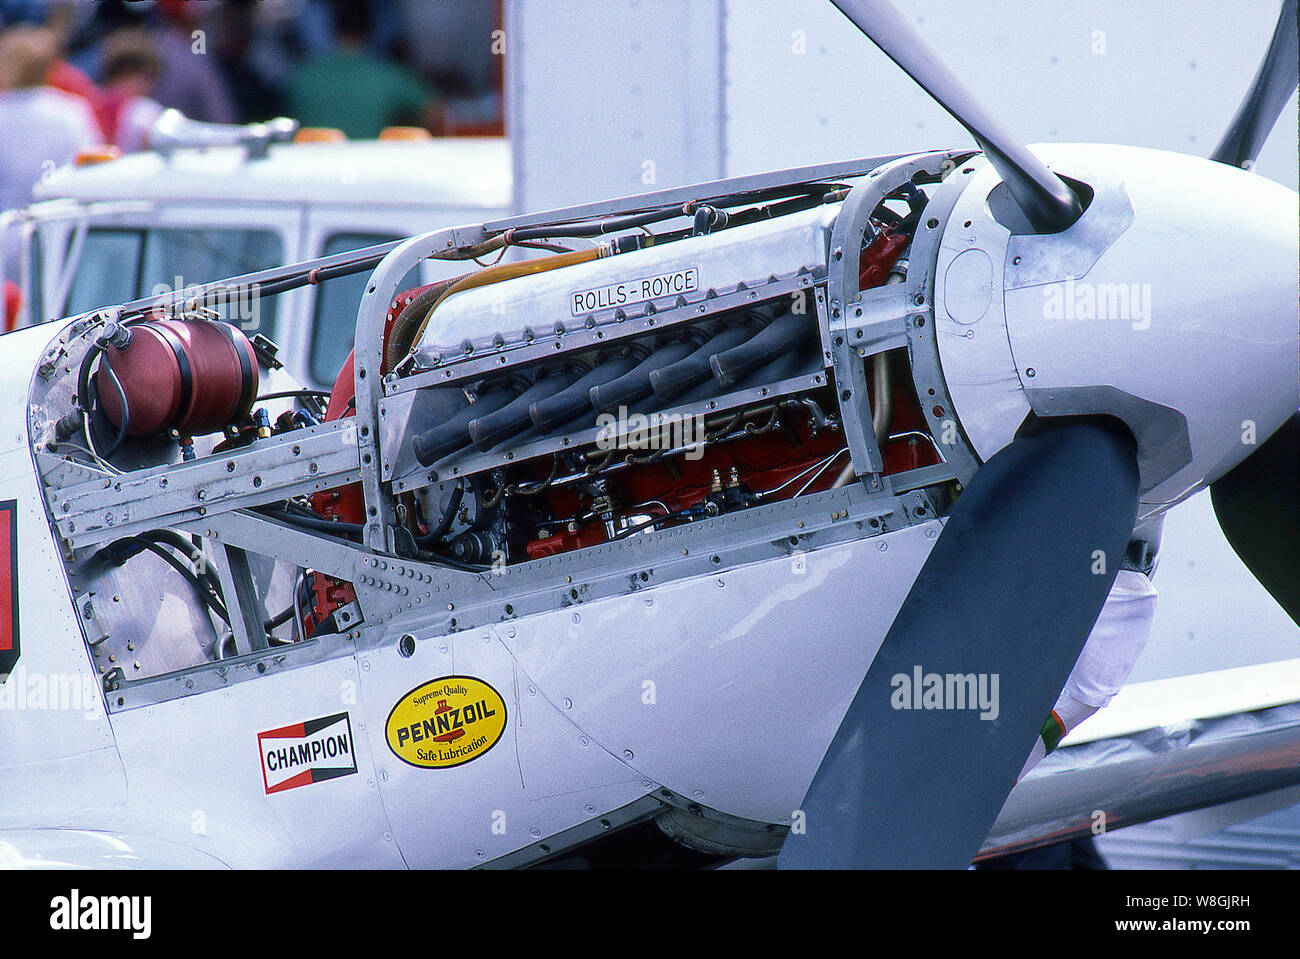 Rolls Royce  V-12 Merlin Aircraft engine in a P-51 Mustang Air Racer Stock Photo